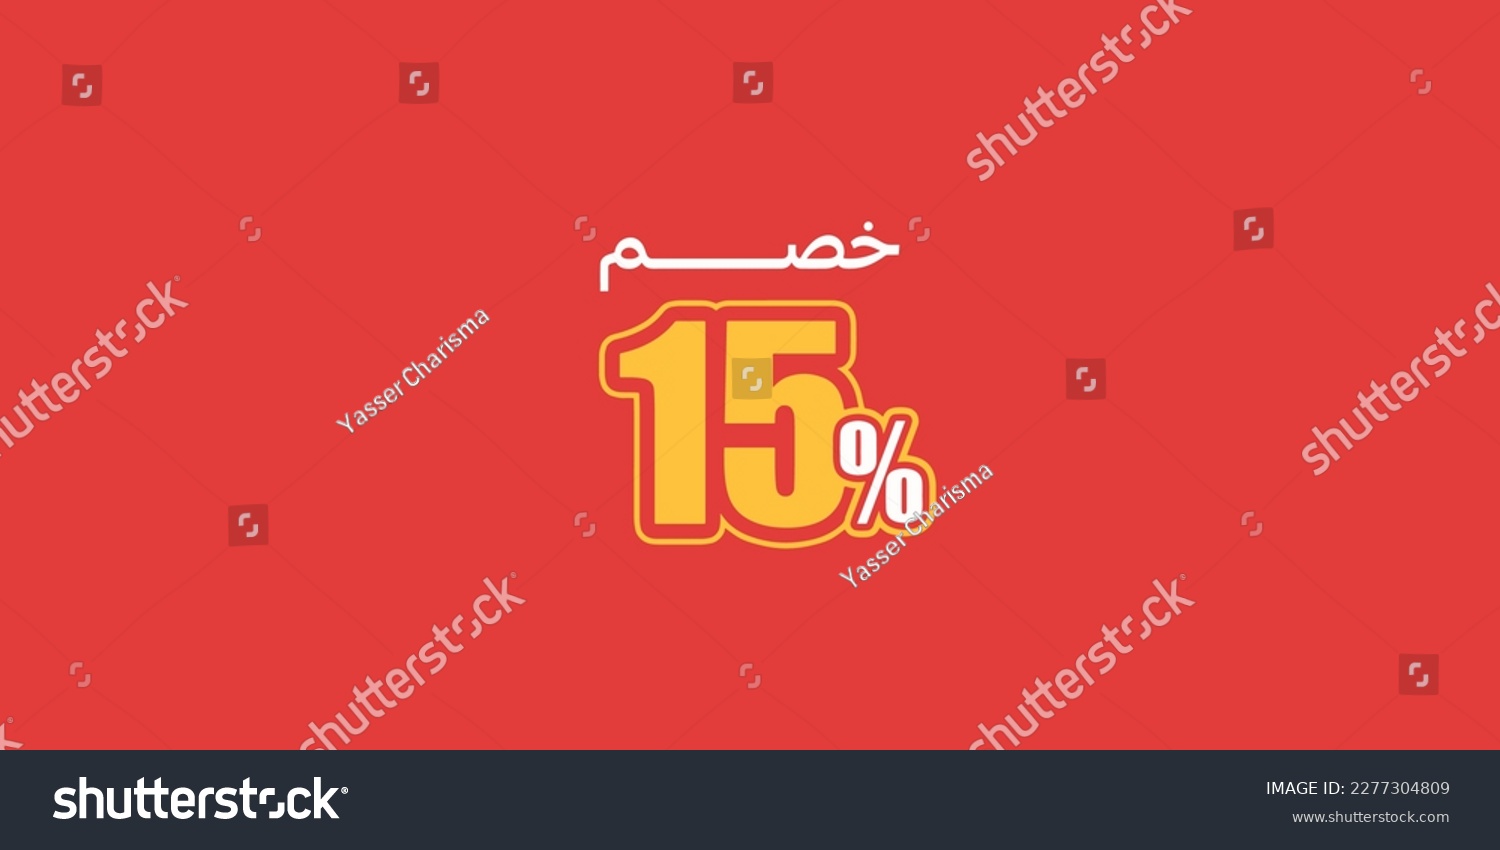 SVG of Sale off discount promotion set made of  numbers . Vector Illustration of  15% percent discount arabic for your unique selling poster, banner ads.
 svg